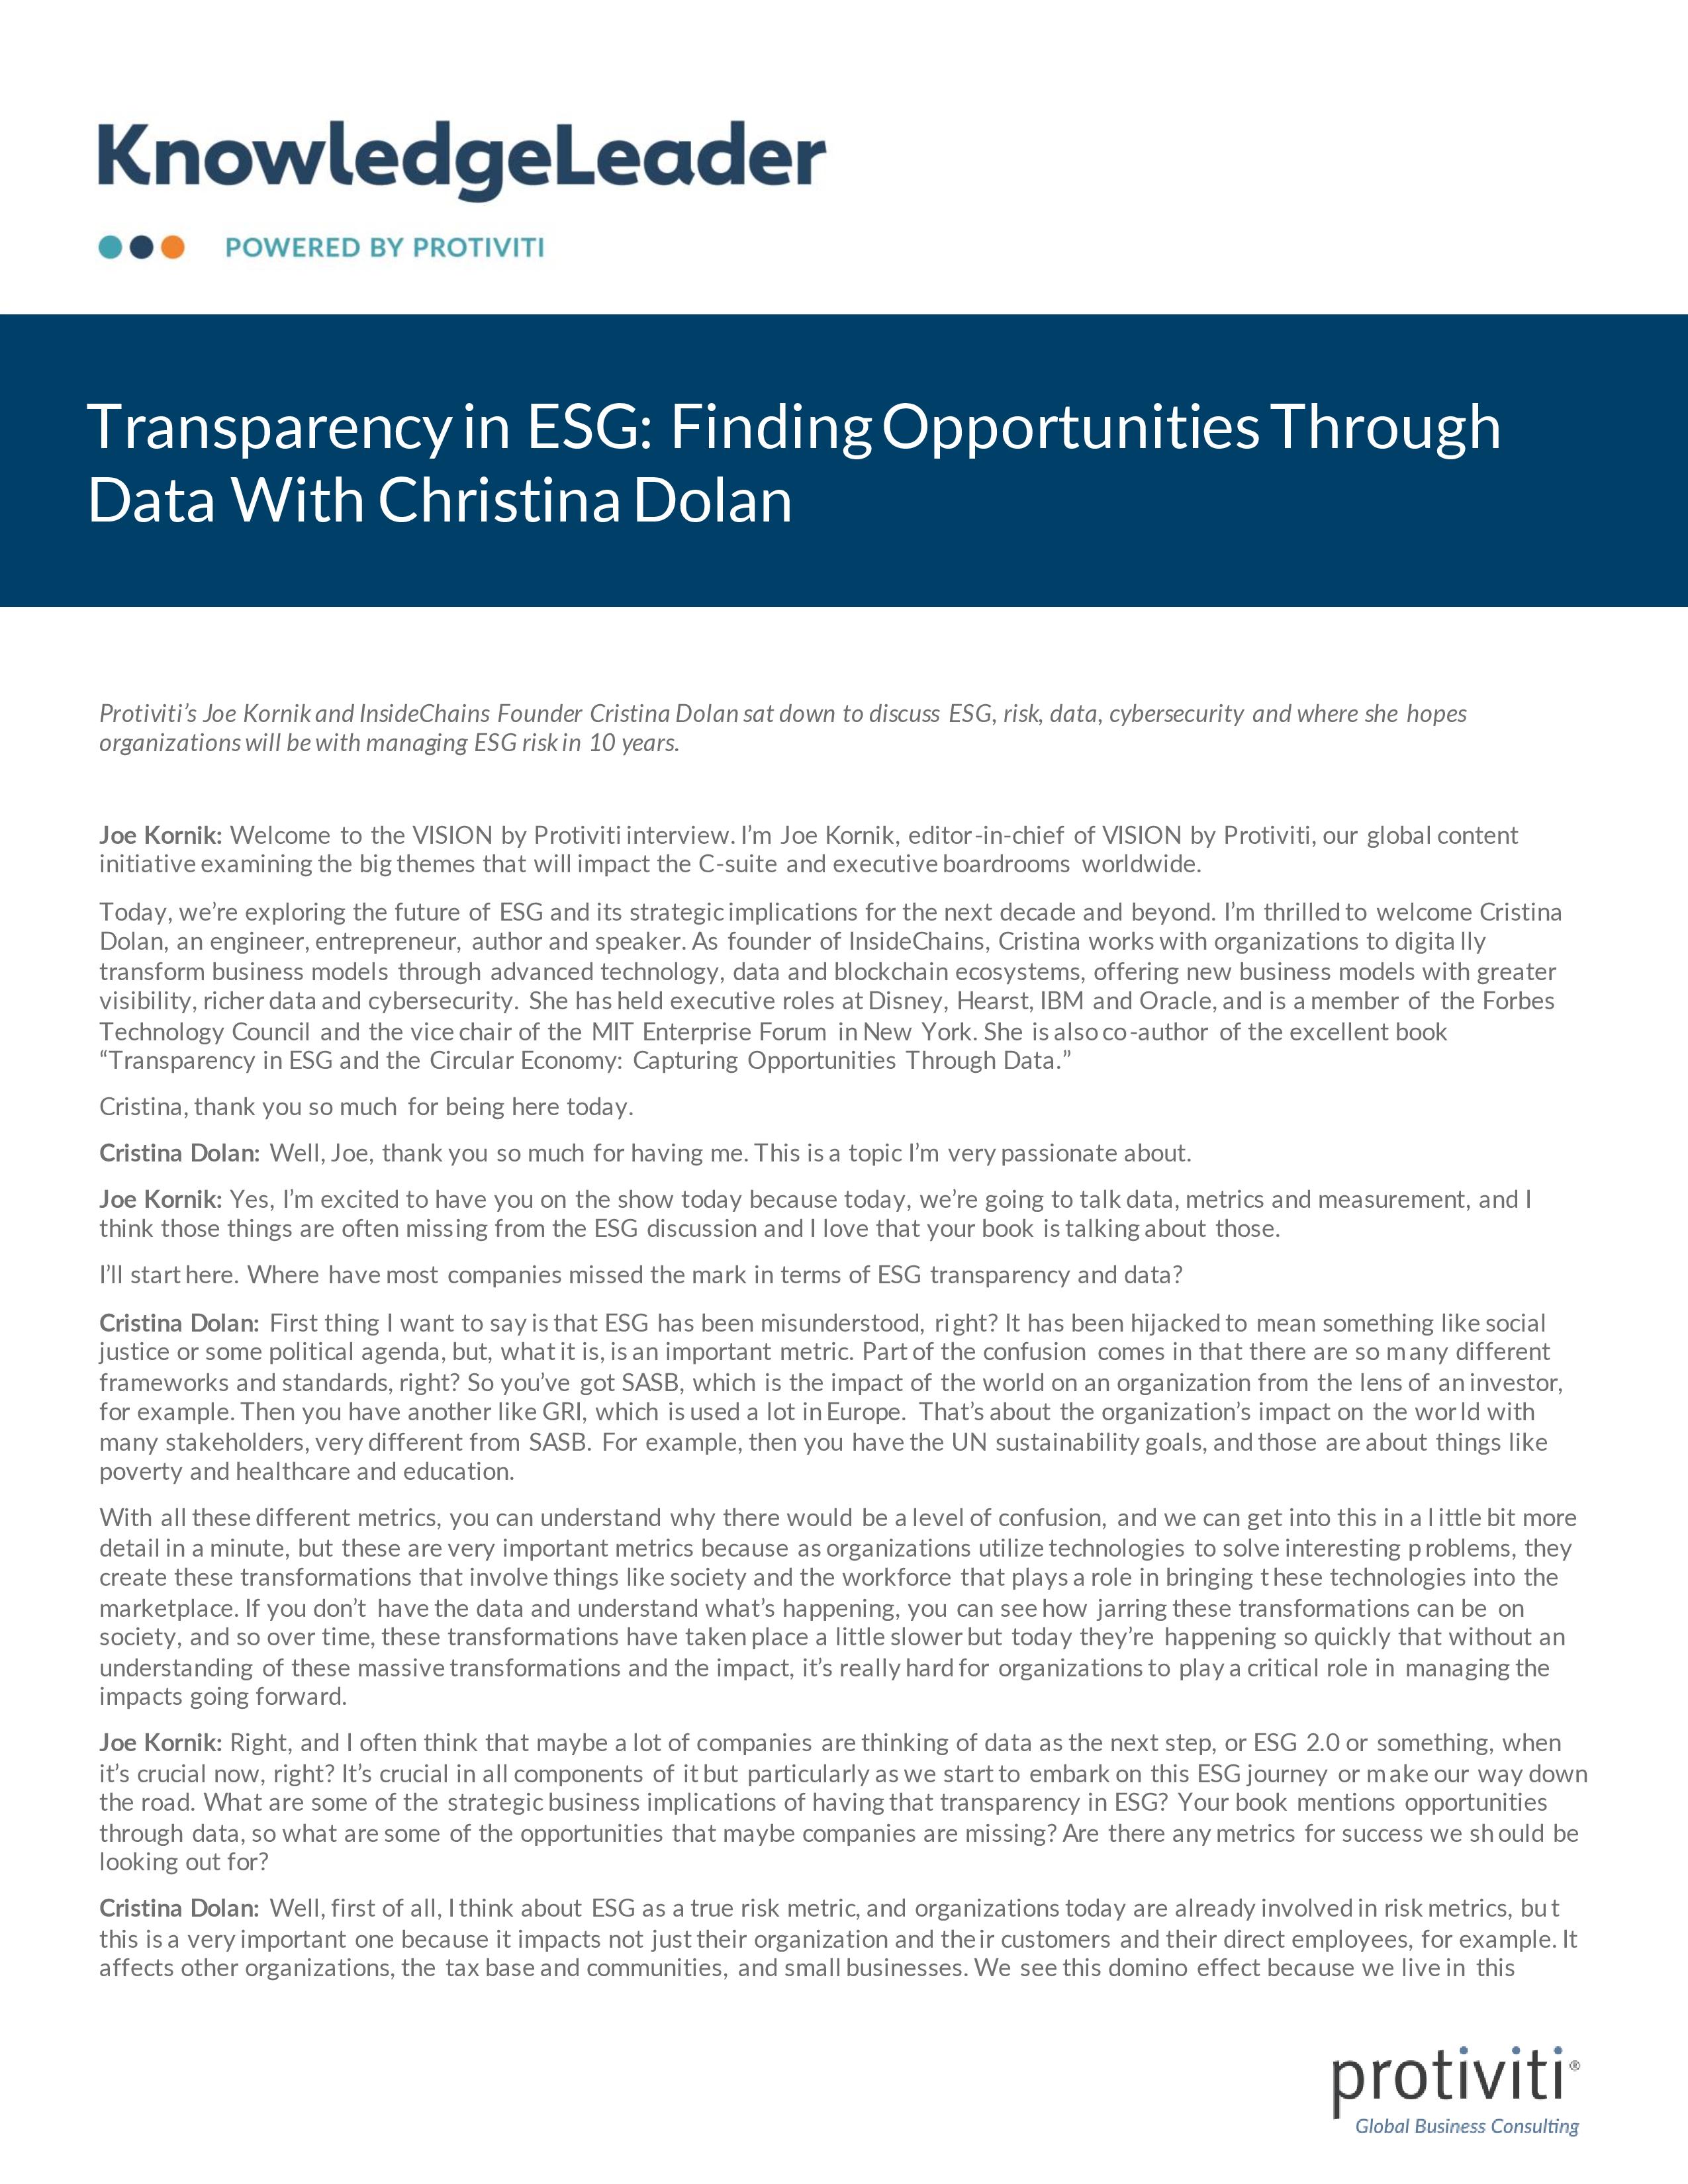 Screenshot of the first page of Transparency in ESG Finding Opportunities Through Data With Christina Dolan